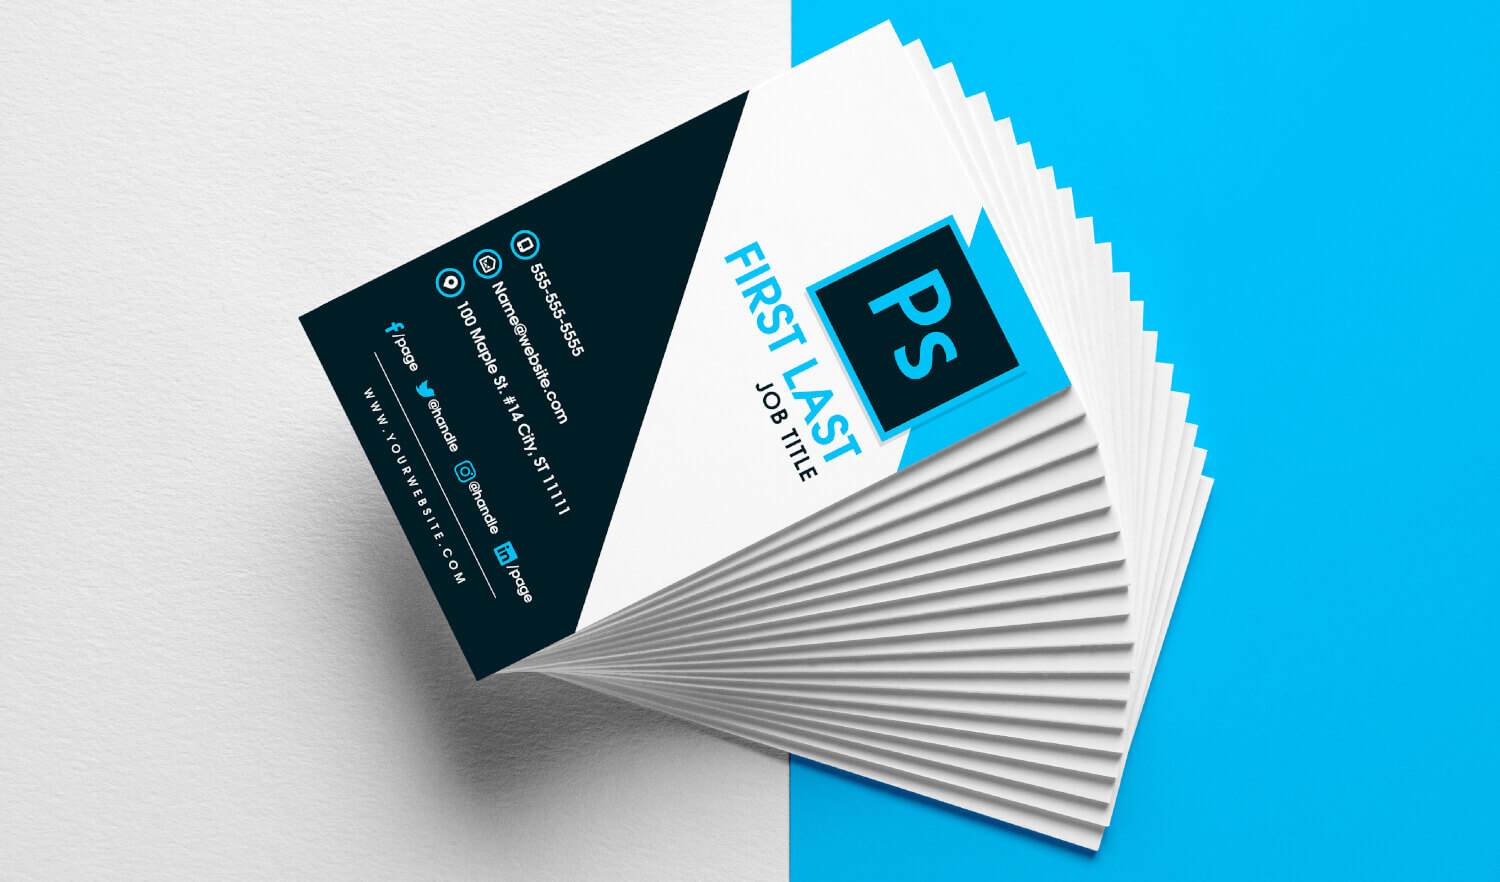 Free Vertical Business Card Template In Psd Format With Regard To Free Business Card Templates In Psd Format